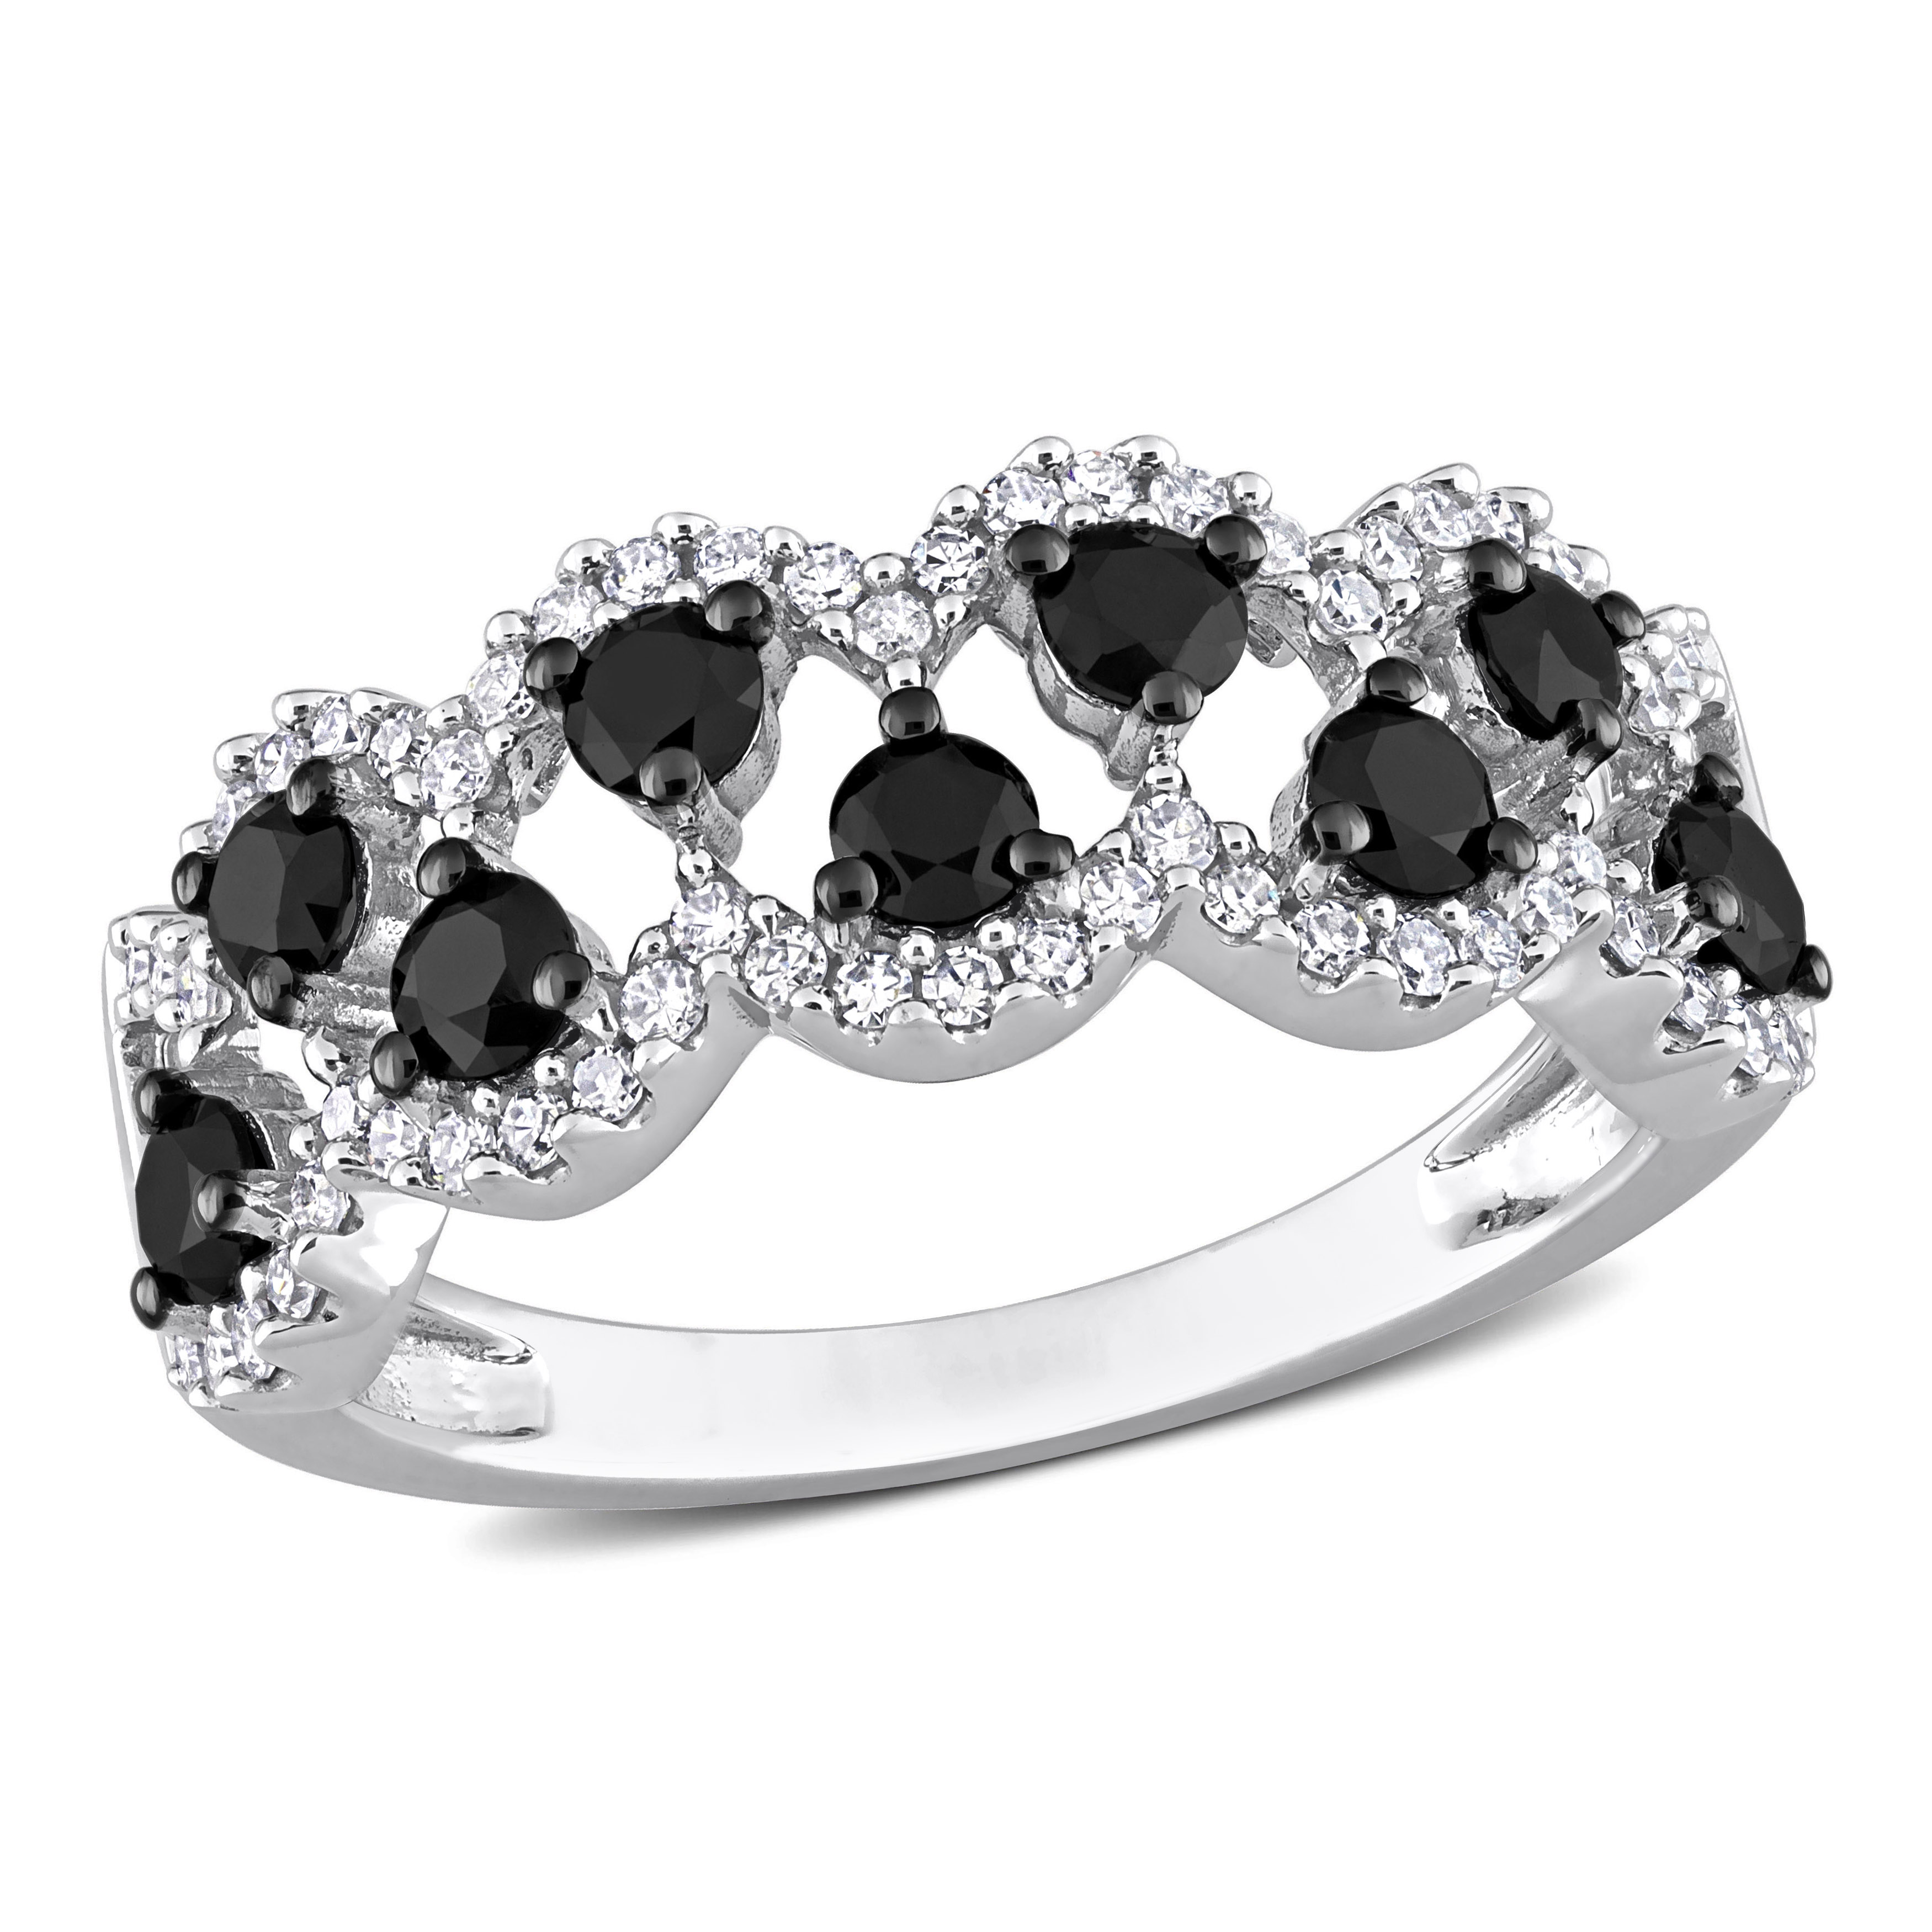 1 CT TDW Black and White Diamond Open Design Ring in 10k Gold with Black Rhodium Plating